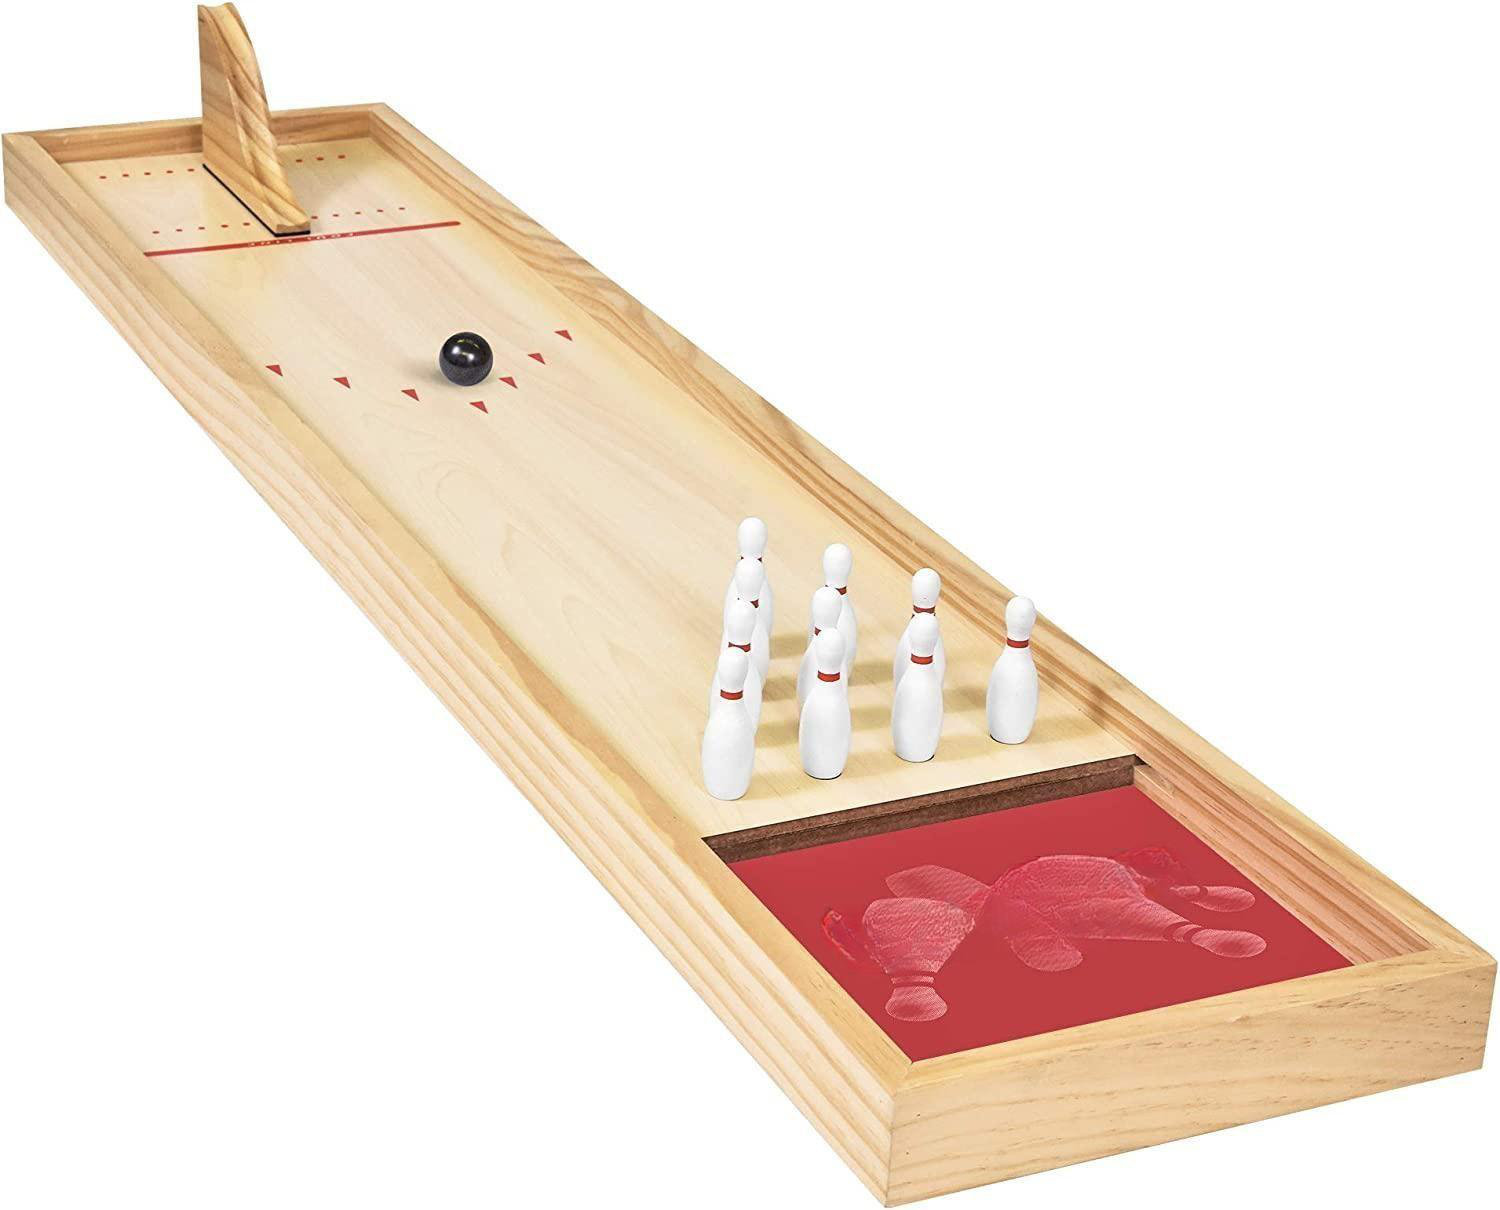  3 otters Mini Bowling Set, Wooden Tabletop Bowling